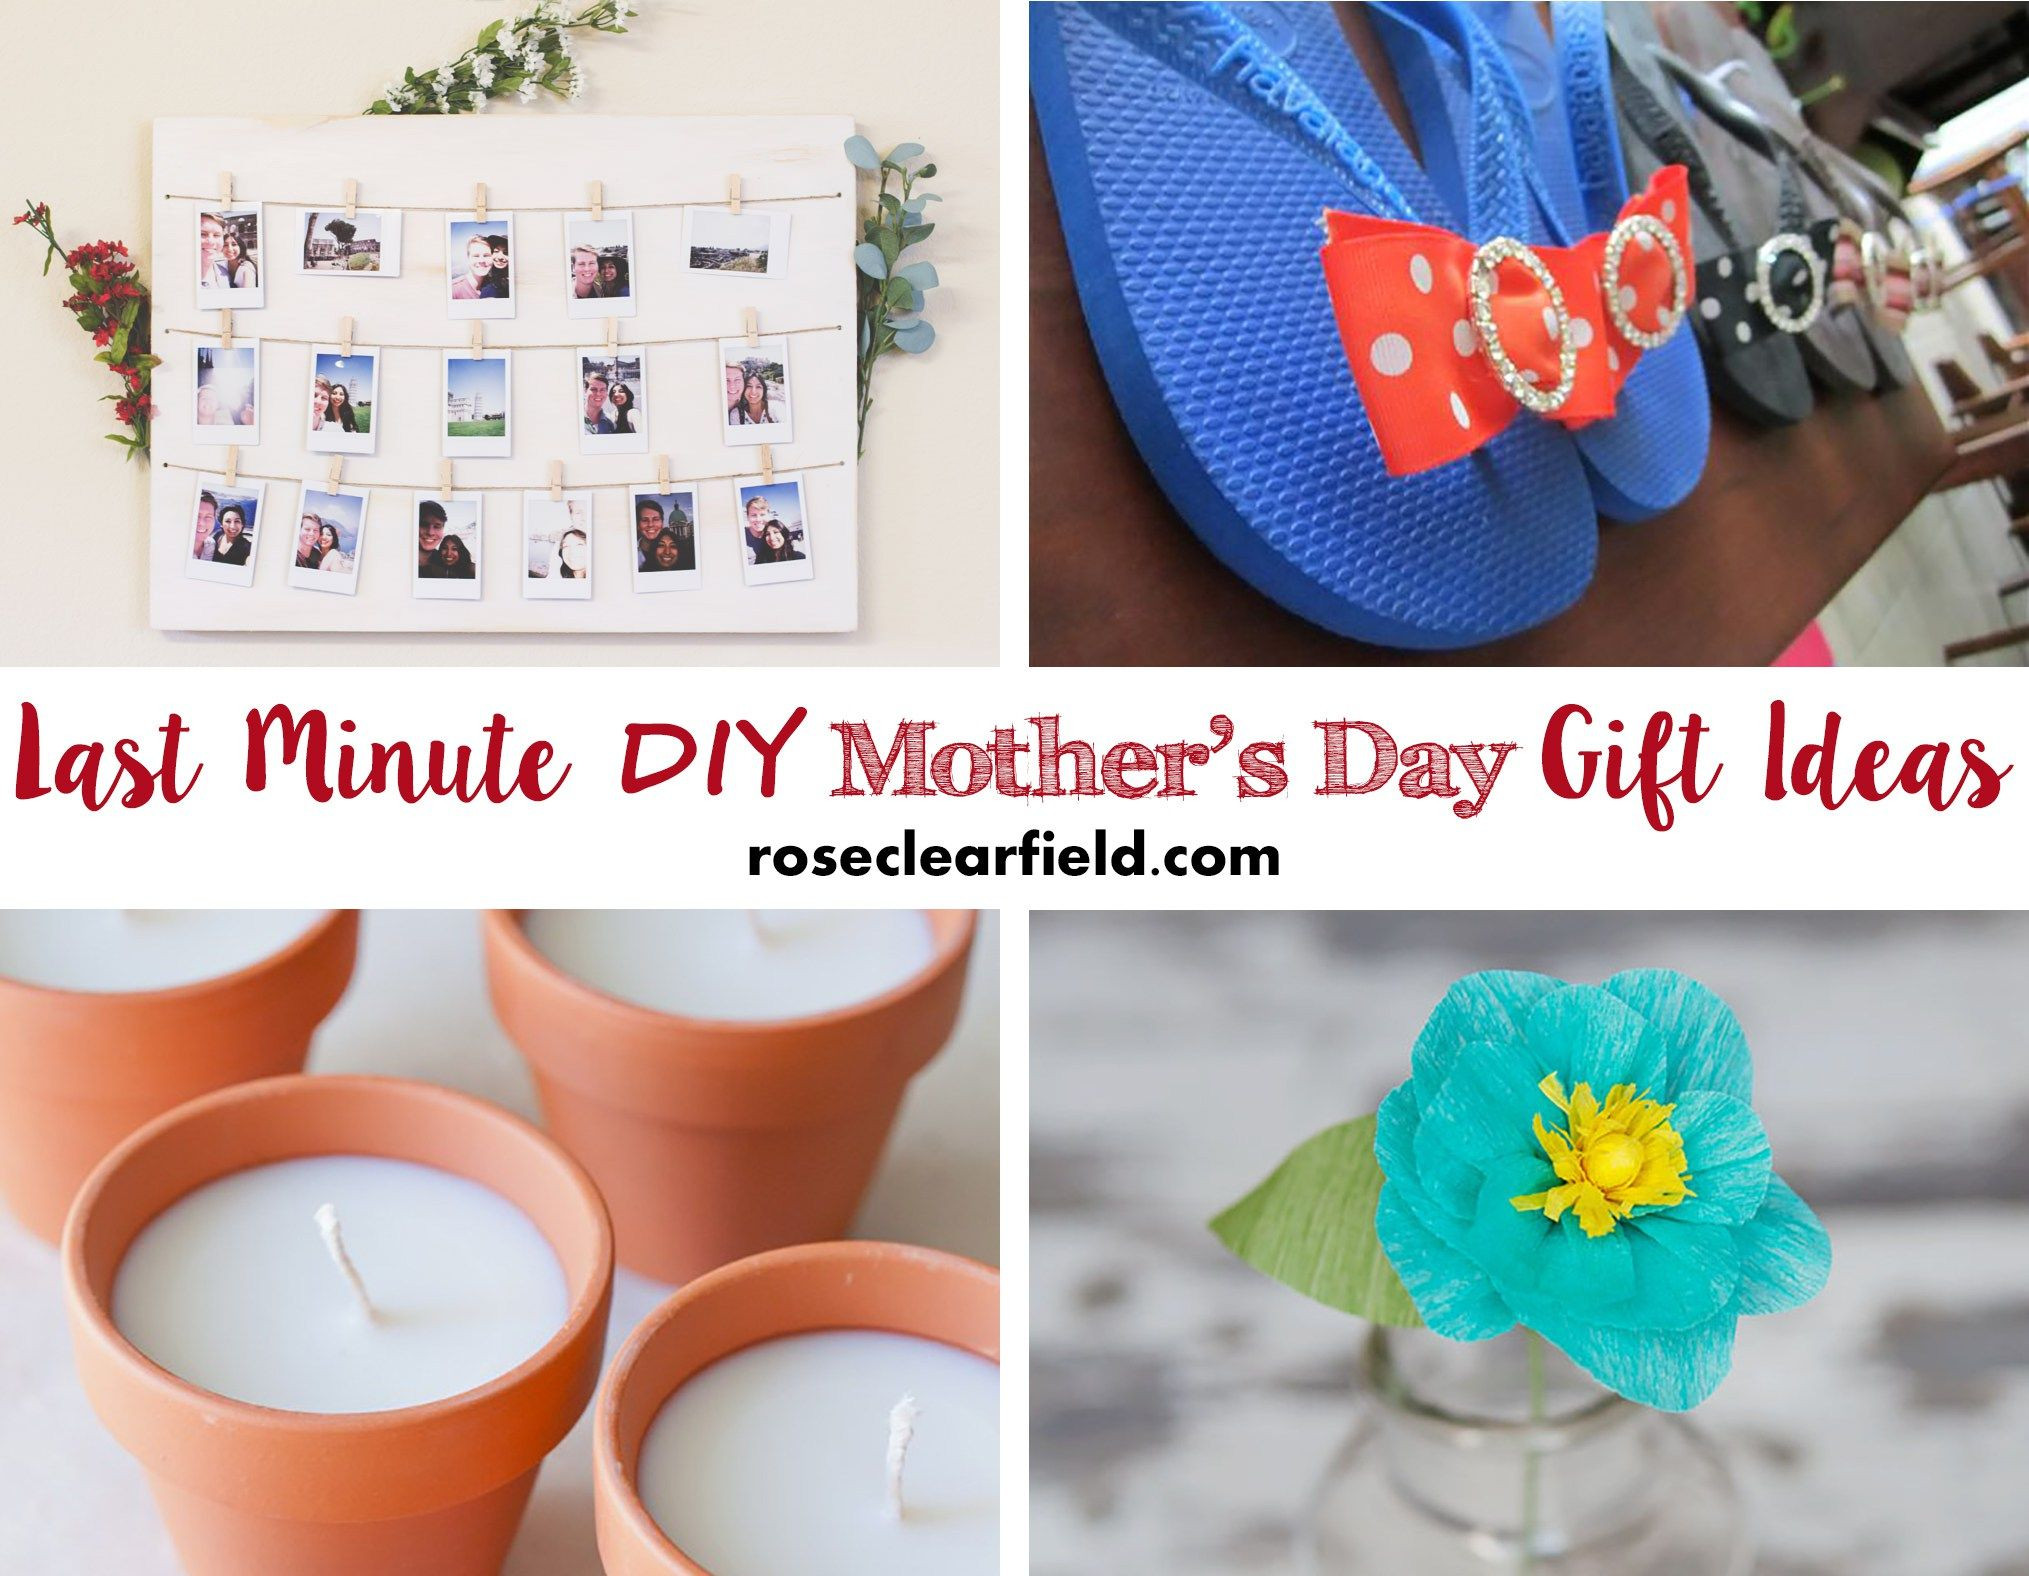 Last Minute Mother'S Day Gift Ideas
 Last Minute DIY Mother s Day Gift Ideas